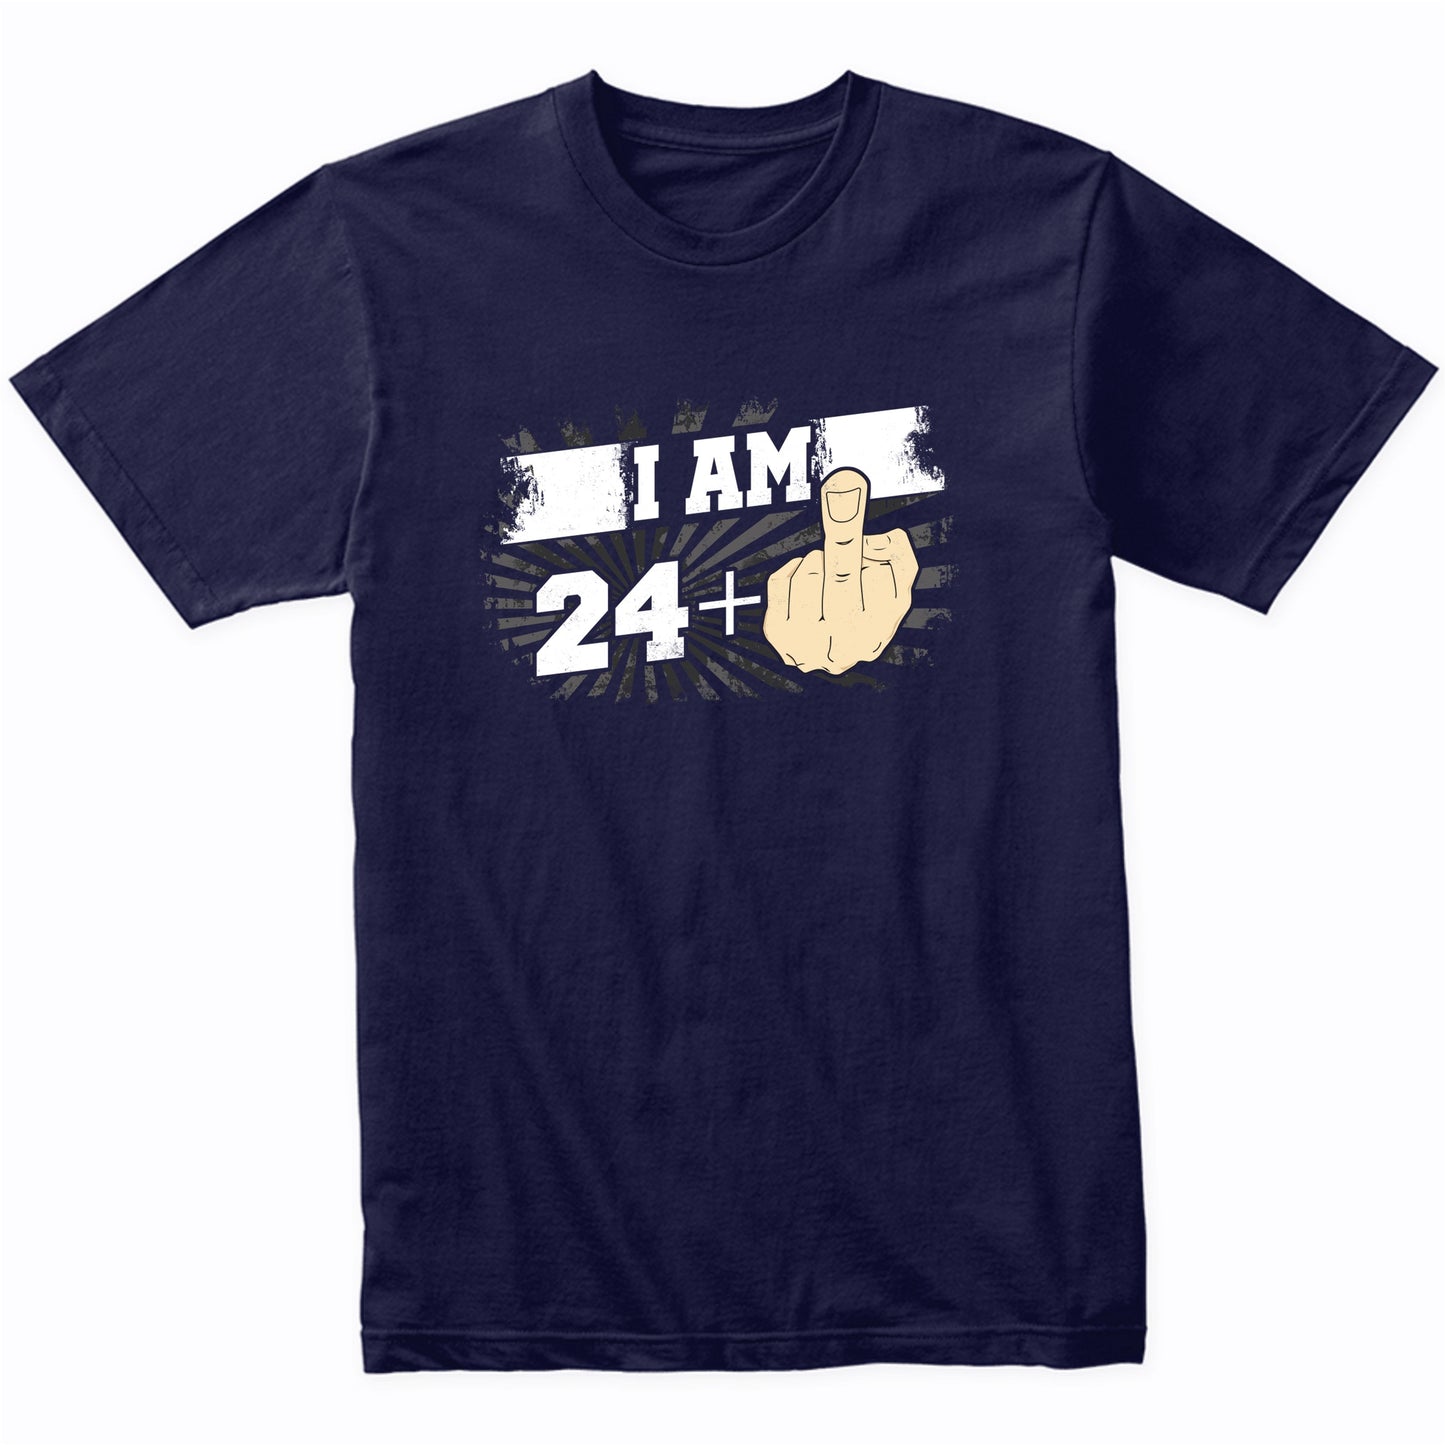 25th Birthday Shirt For Men - I Am 24 Plus Middle Finger 25 Years Old T-Shirt